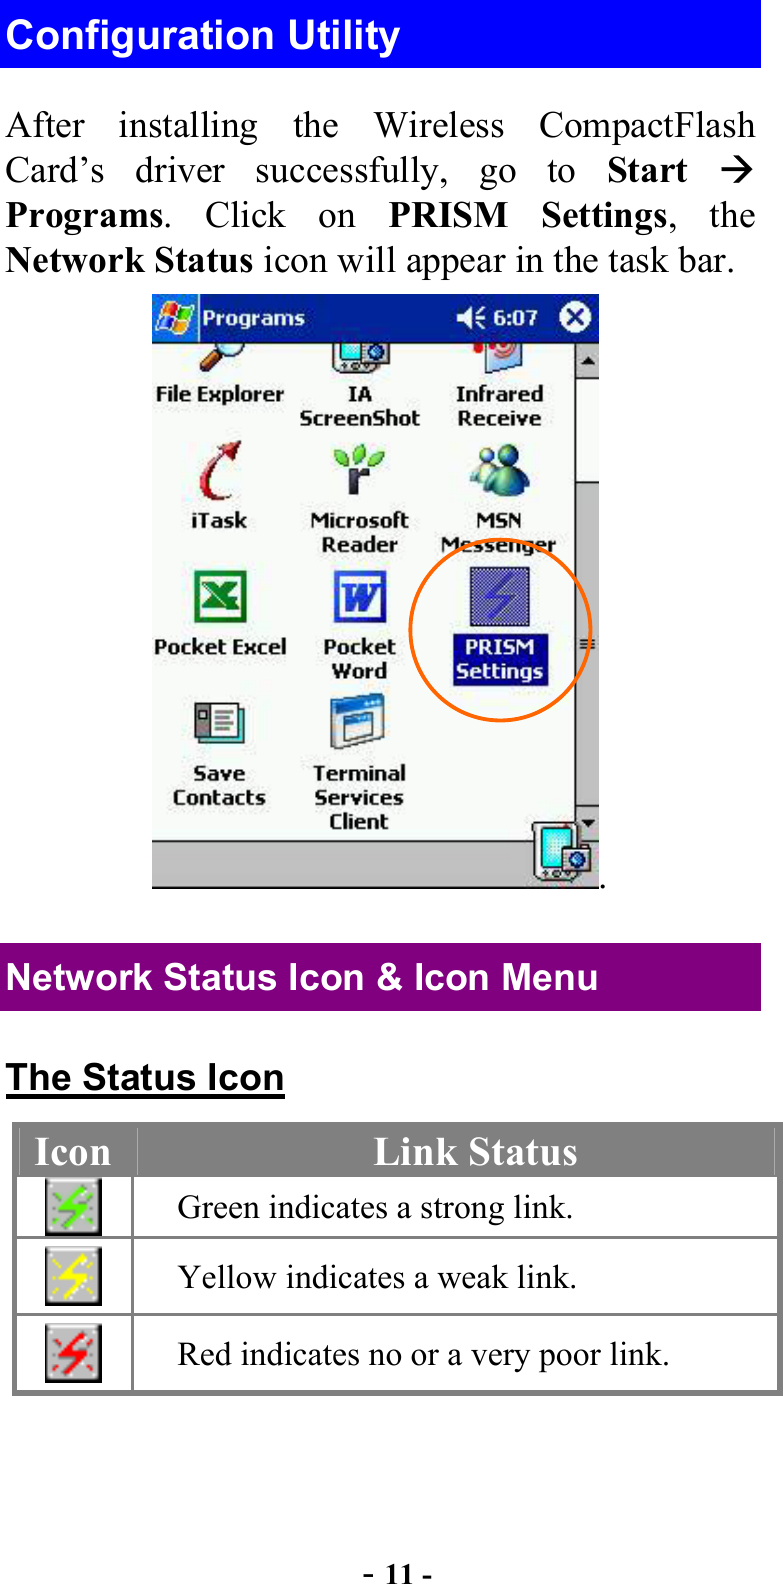  - 11 - Configuration Utility After installing the Wireless CompactFlash Card’s driver successfully, go to Start   Programs. Click on PRISM Settings, the Network Status icon will appear in the task bar. . Network Status Icon &amp; Icon Menu The Status Icon Icon  Link Status  Green indicates a strong link.  Yellow indicates a weak link.  Red indicates no or a very poor link. 